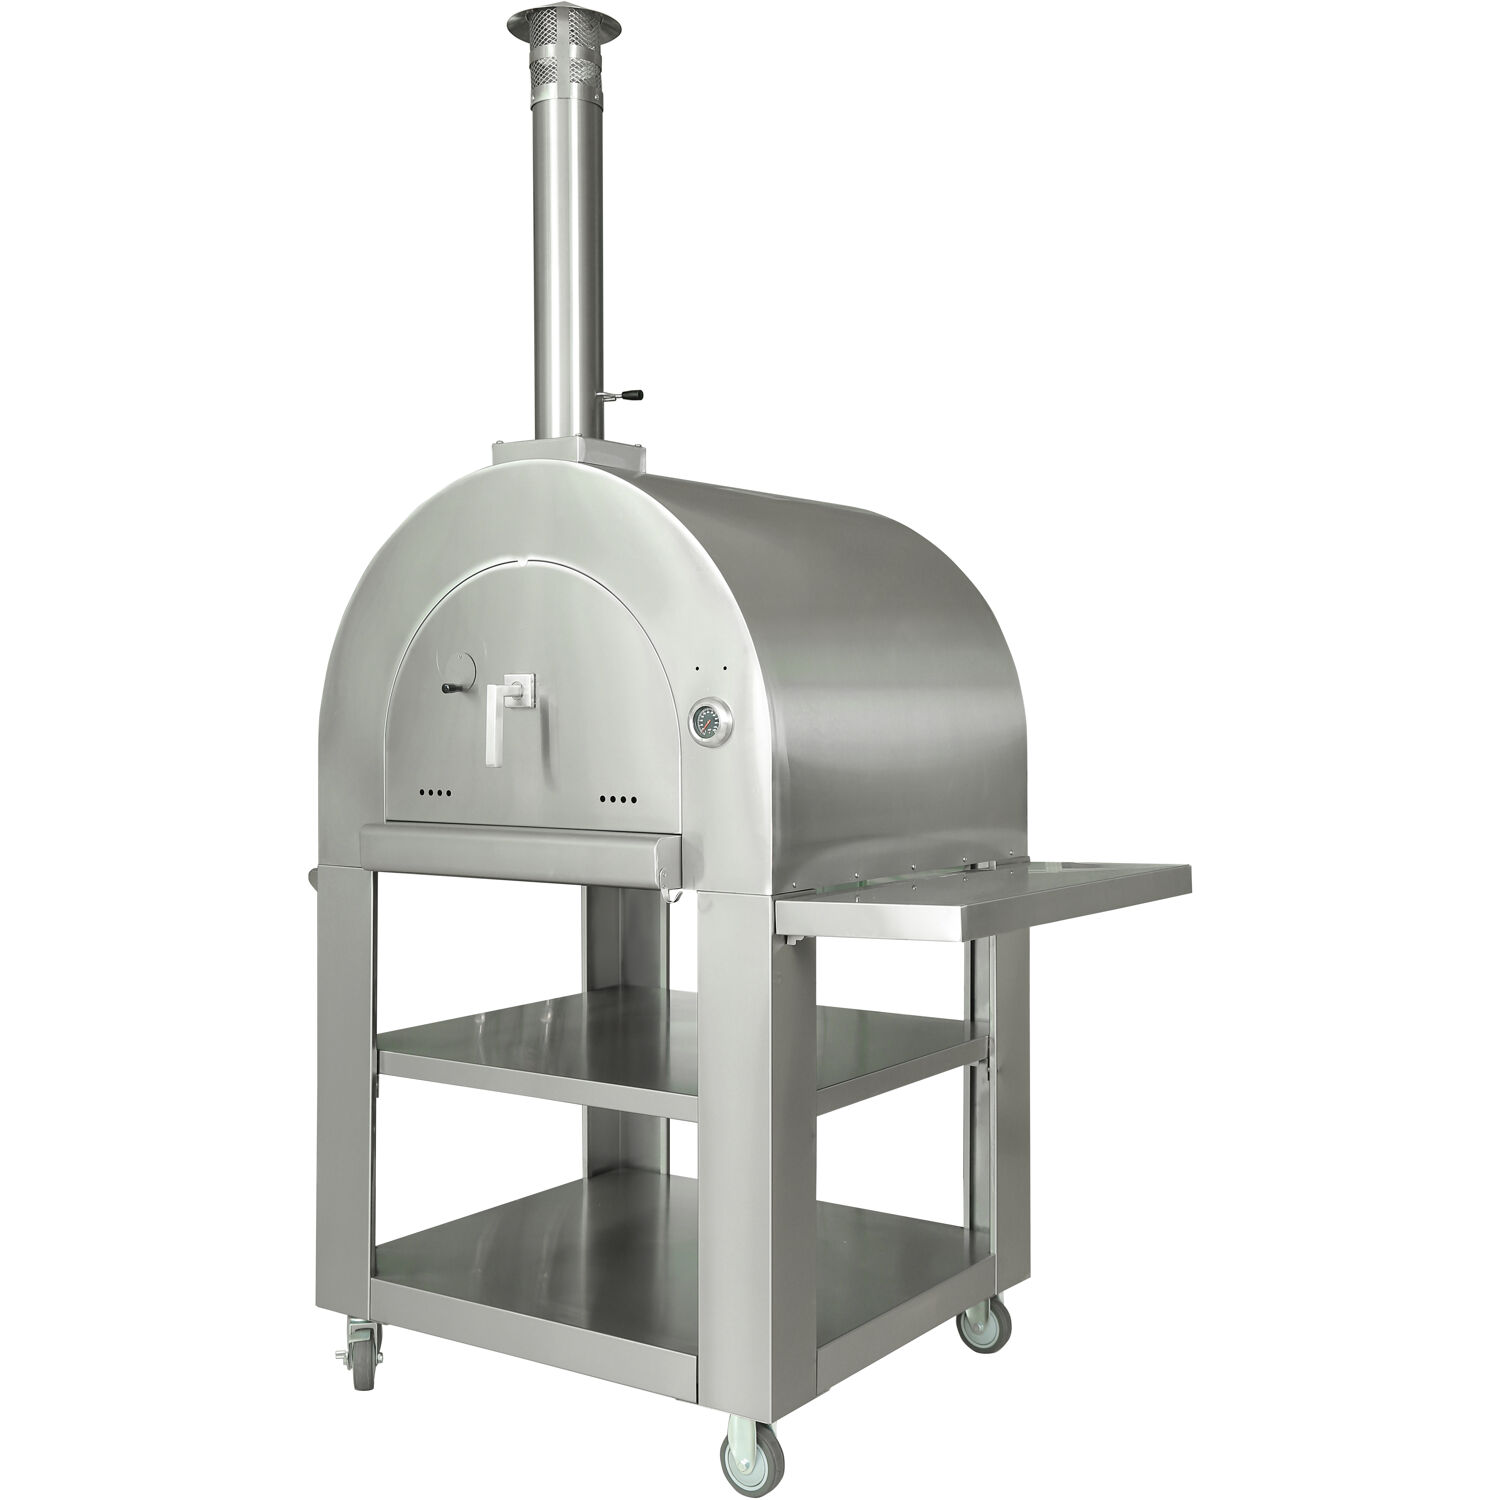 Hanover Portable Outdoor Wood Fired Pizza Oven | Stainless Steel Freestanding Homemade Pizza Maker with Built-In Thermometer, Shelves, Castors, and Ash-Tray - image 7 of 11